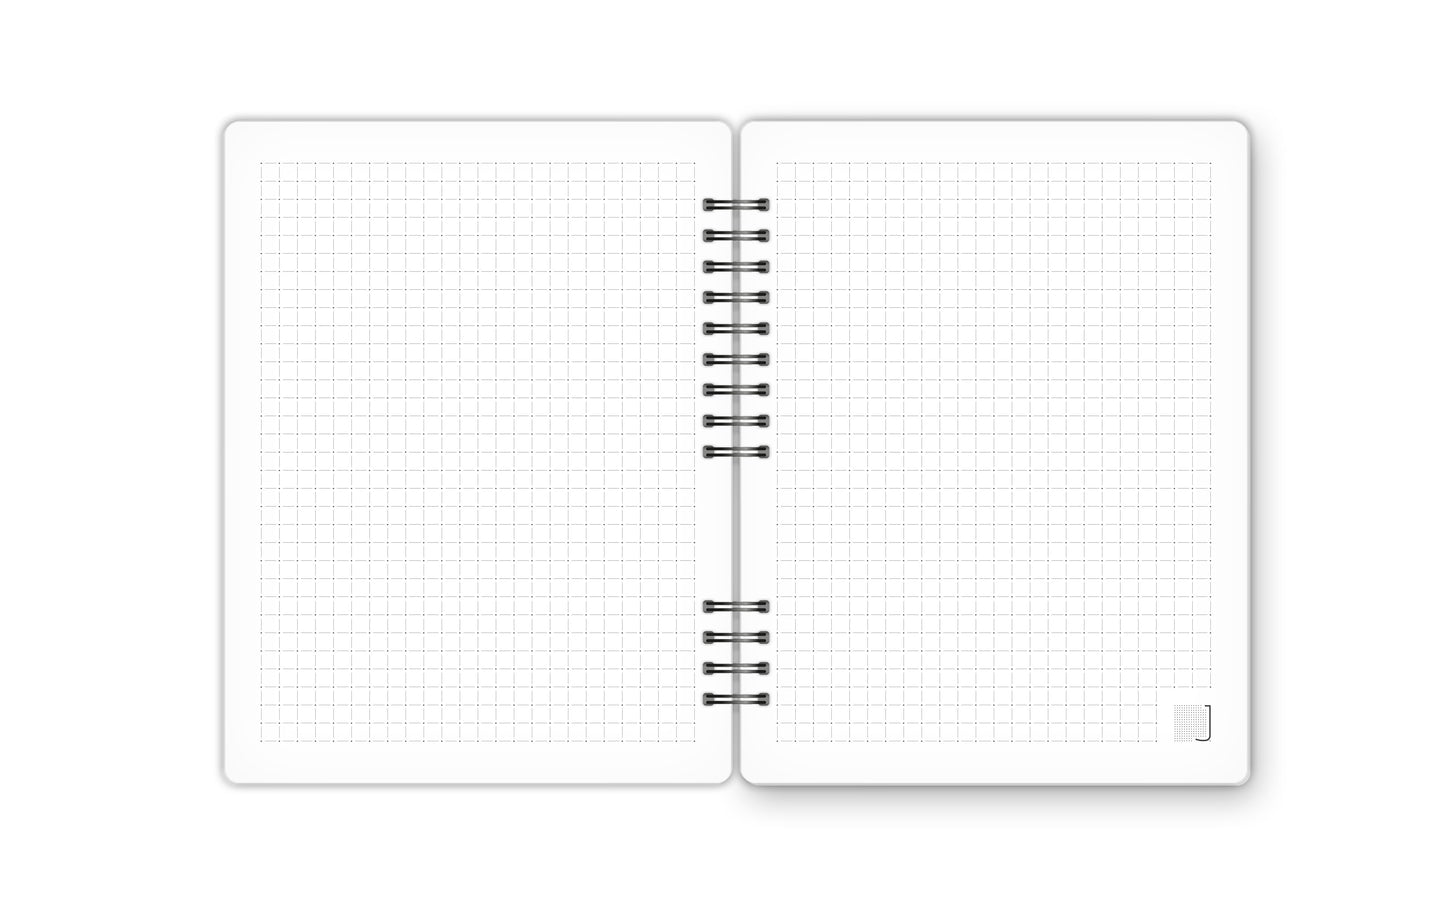 Dots Grid - 18X14 cm - 75 Sheets | Teal - from Journals